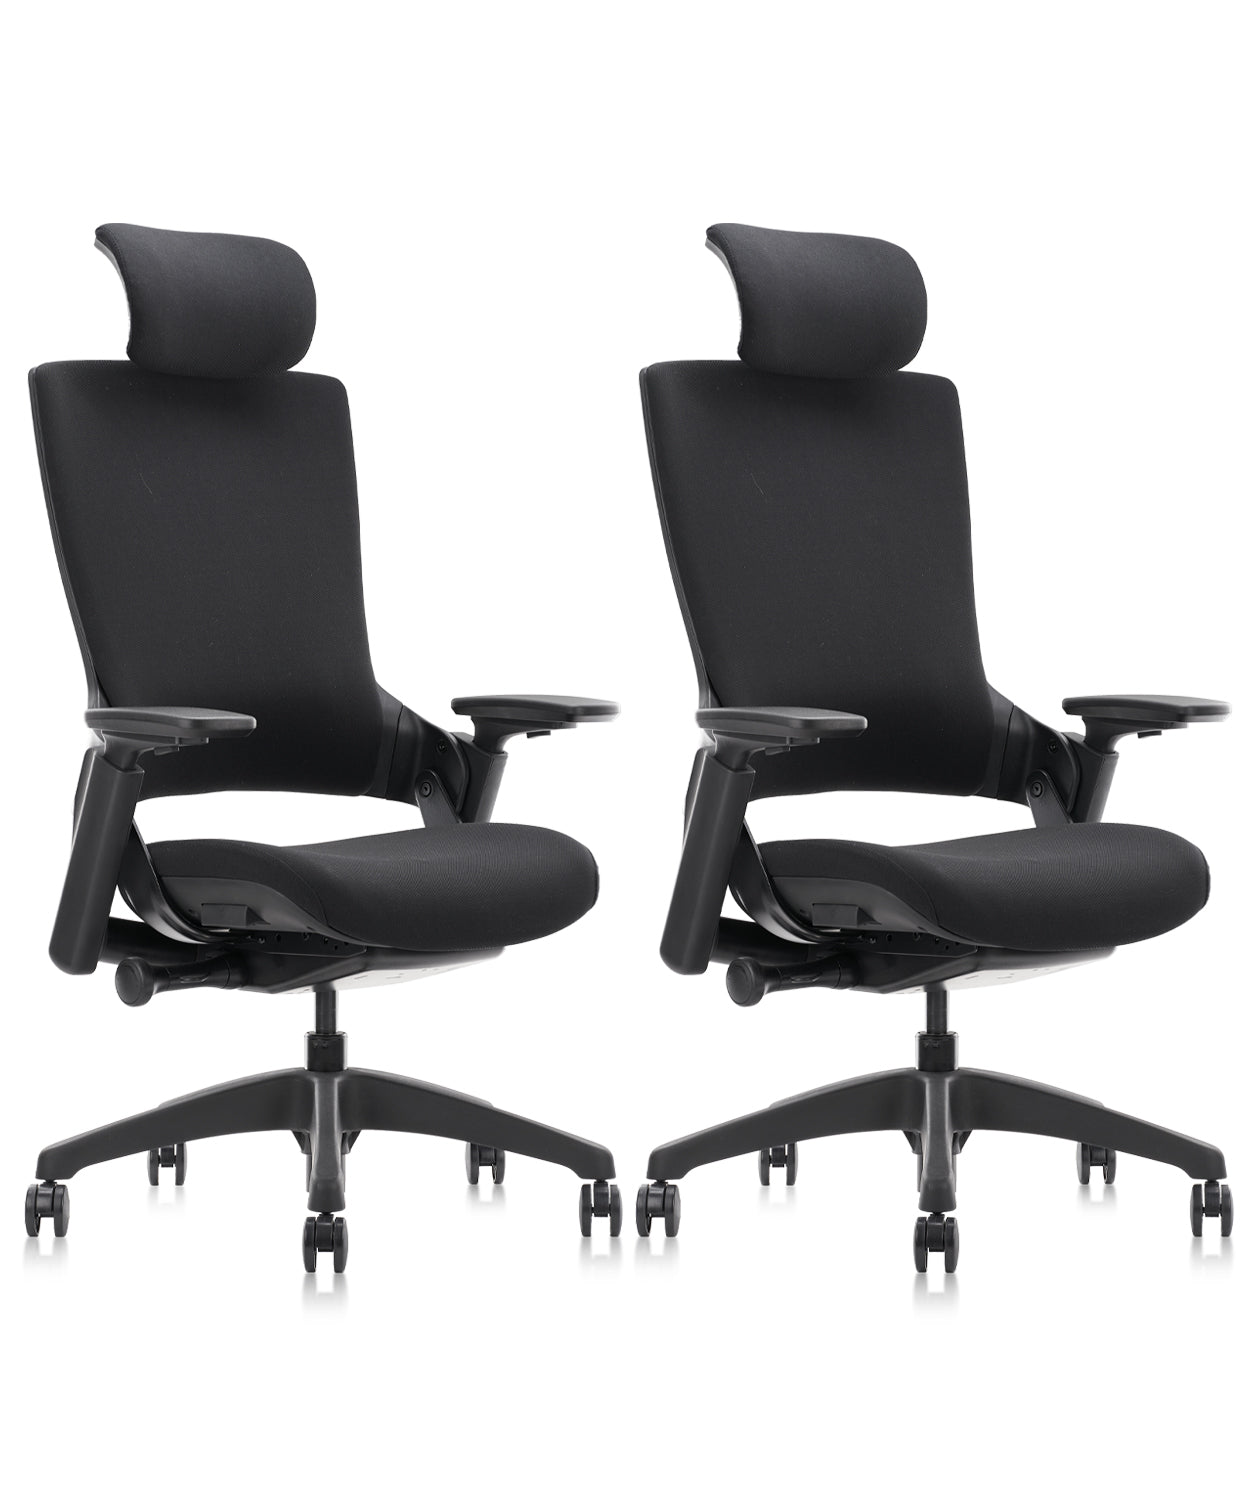 CLATINA Ergonomic High Swivel Executive Chair with Adjustable Height Head 3D Arm Rest Lumbar Support and Upholstered Back for Home Office Black Mesh